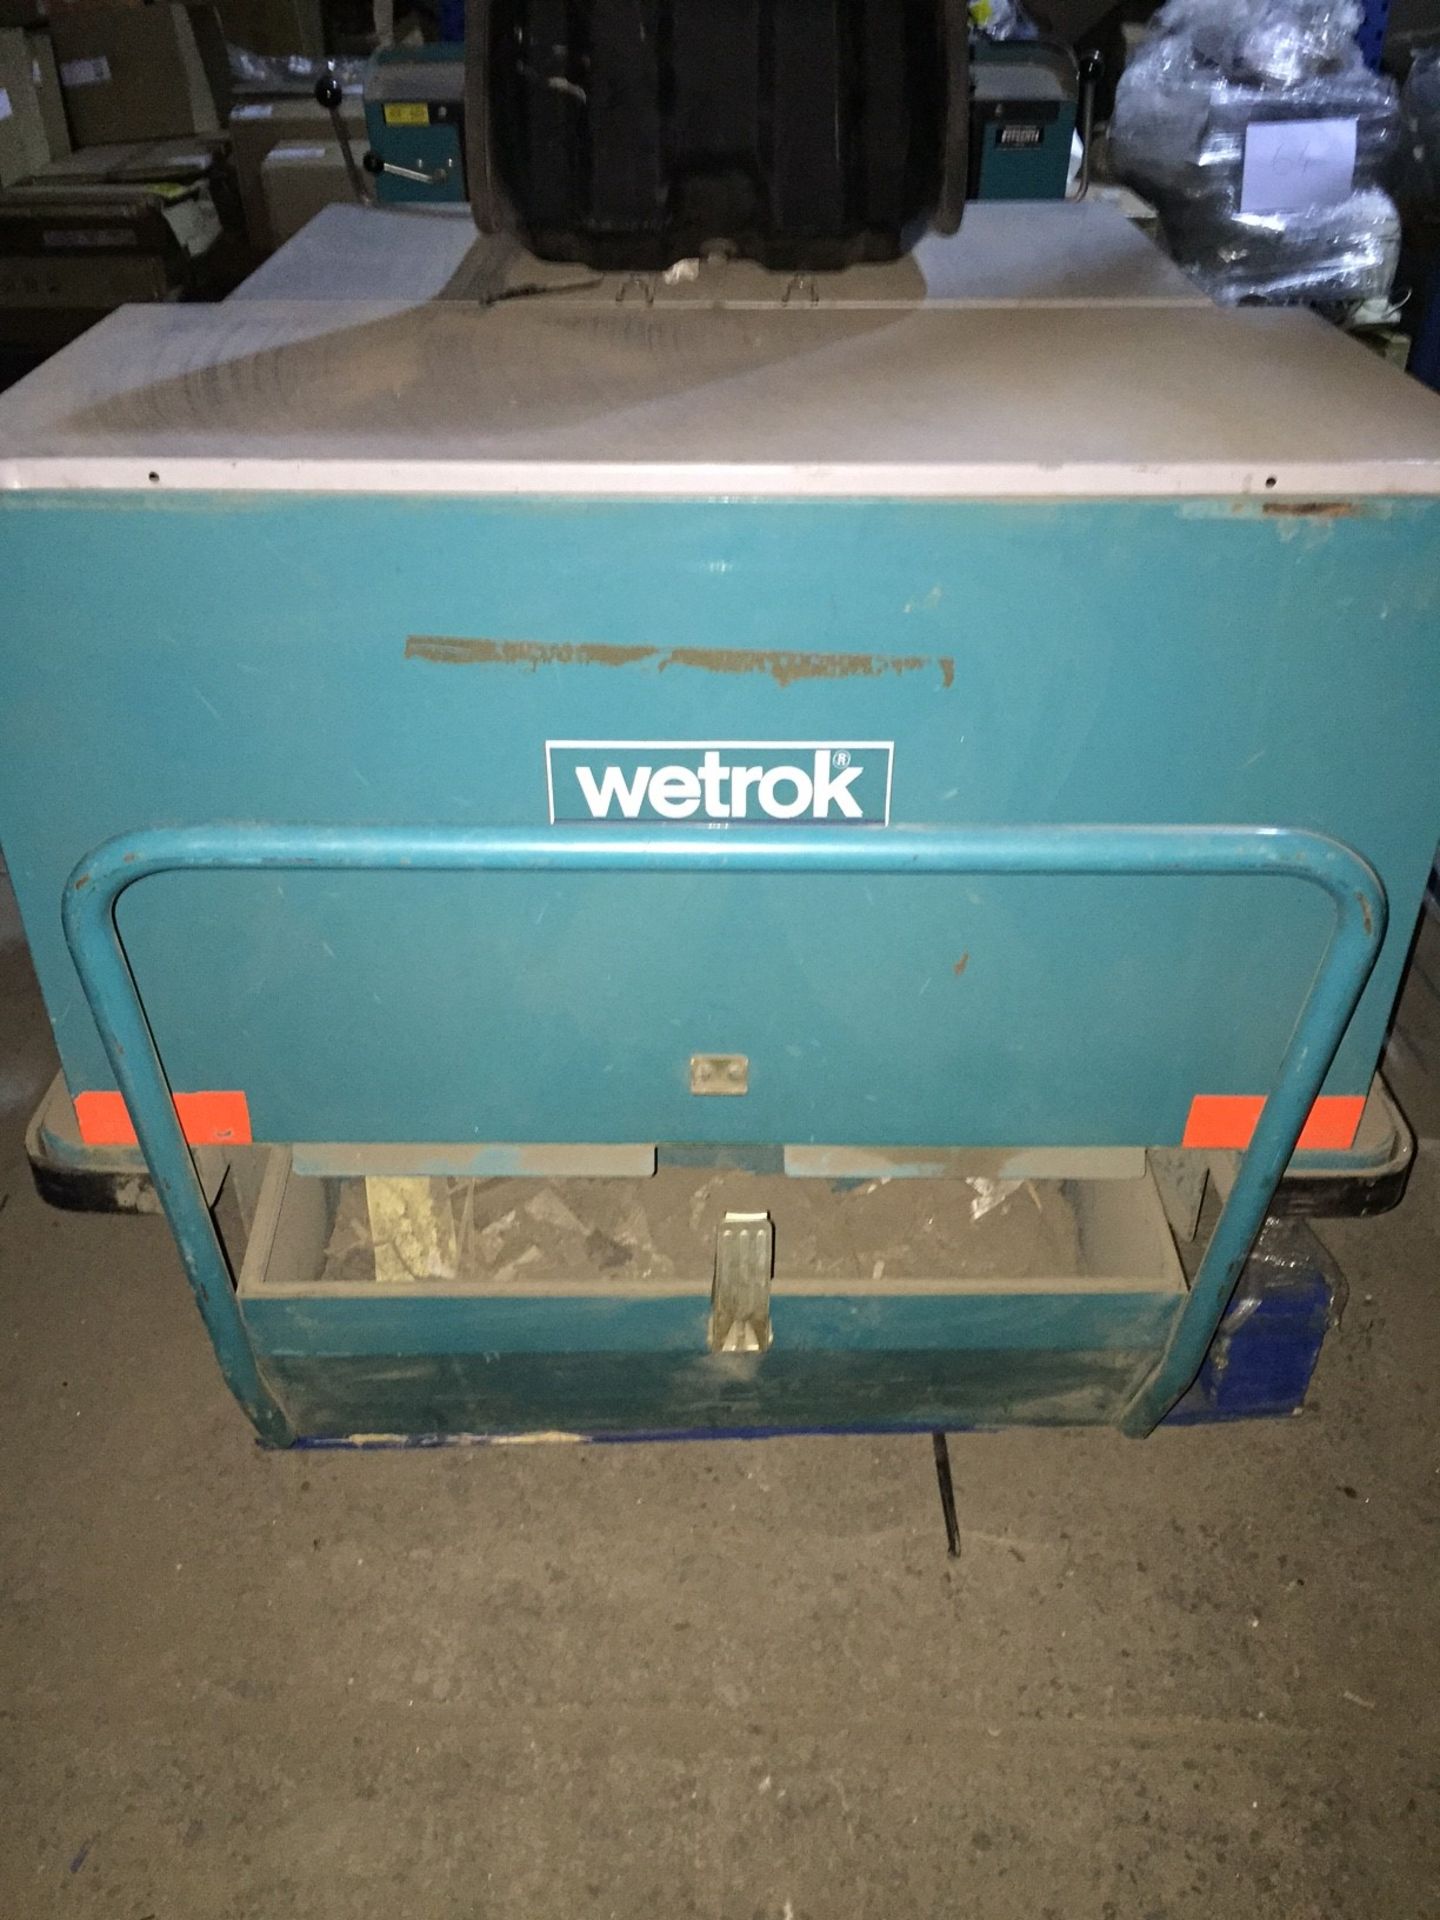 Wetrok Commercial Ride-On Floor Cleaning/Sweeping Machine - Complete With Charger and Key - Image 4 of 6